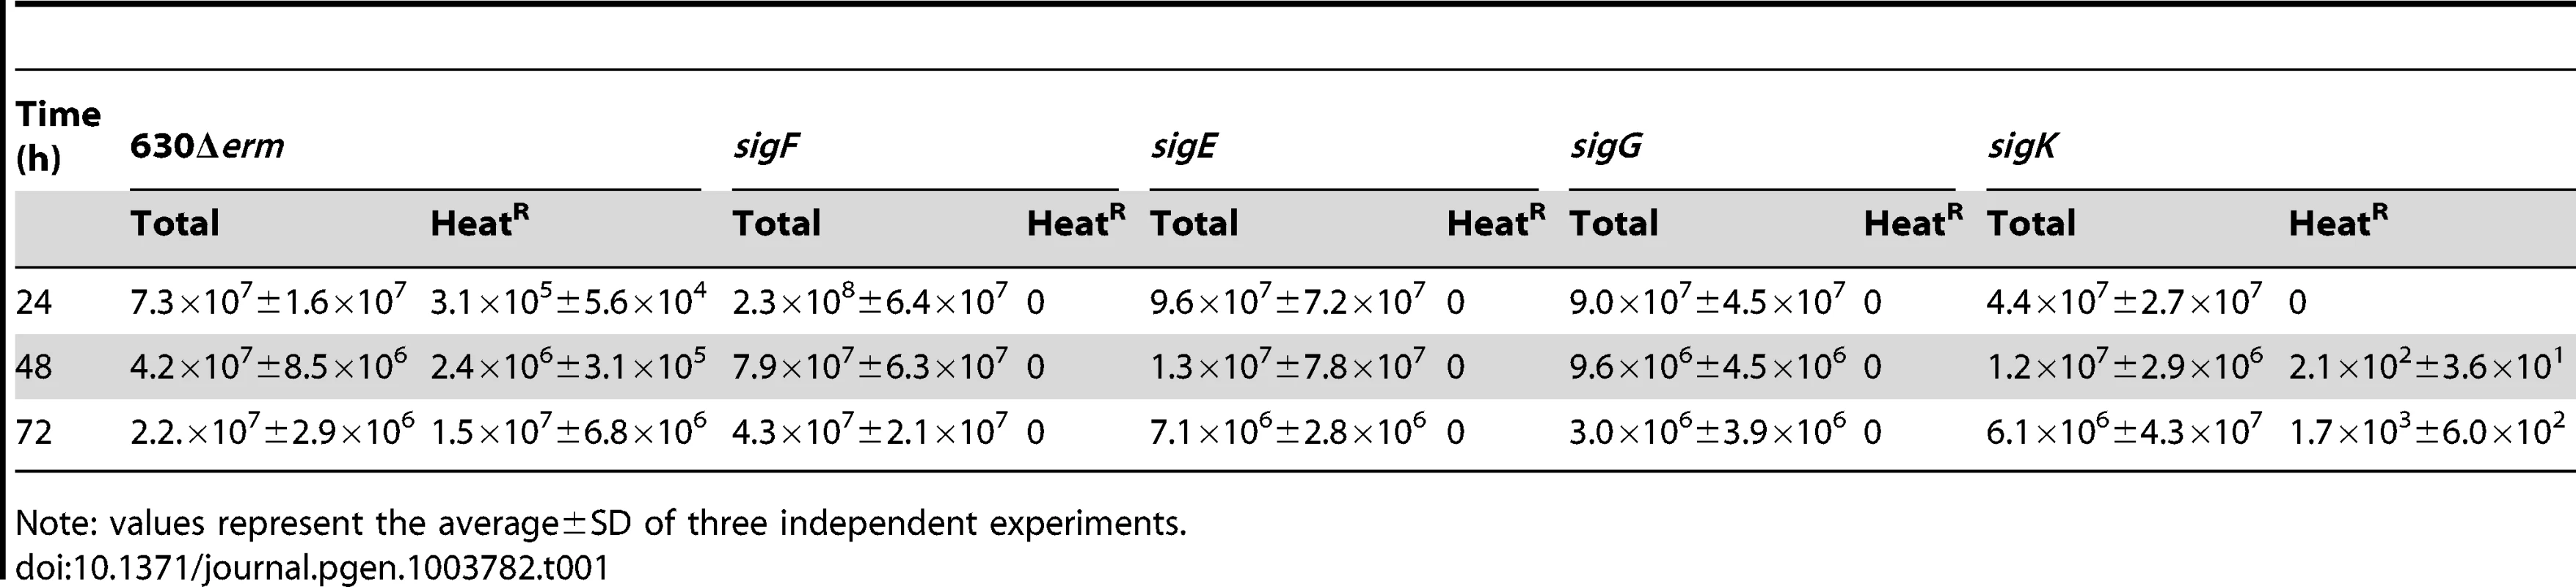 Total and heat resistant (Heat<sup>R</sup>) cell counts (CFU/ml) for the wild type strain (630Δ<i>erm</i>) and congenic <i>sigF</i>, <i>sigE</i>, <i>sigG</i> and <i>sigK</i> mutants in SM.